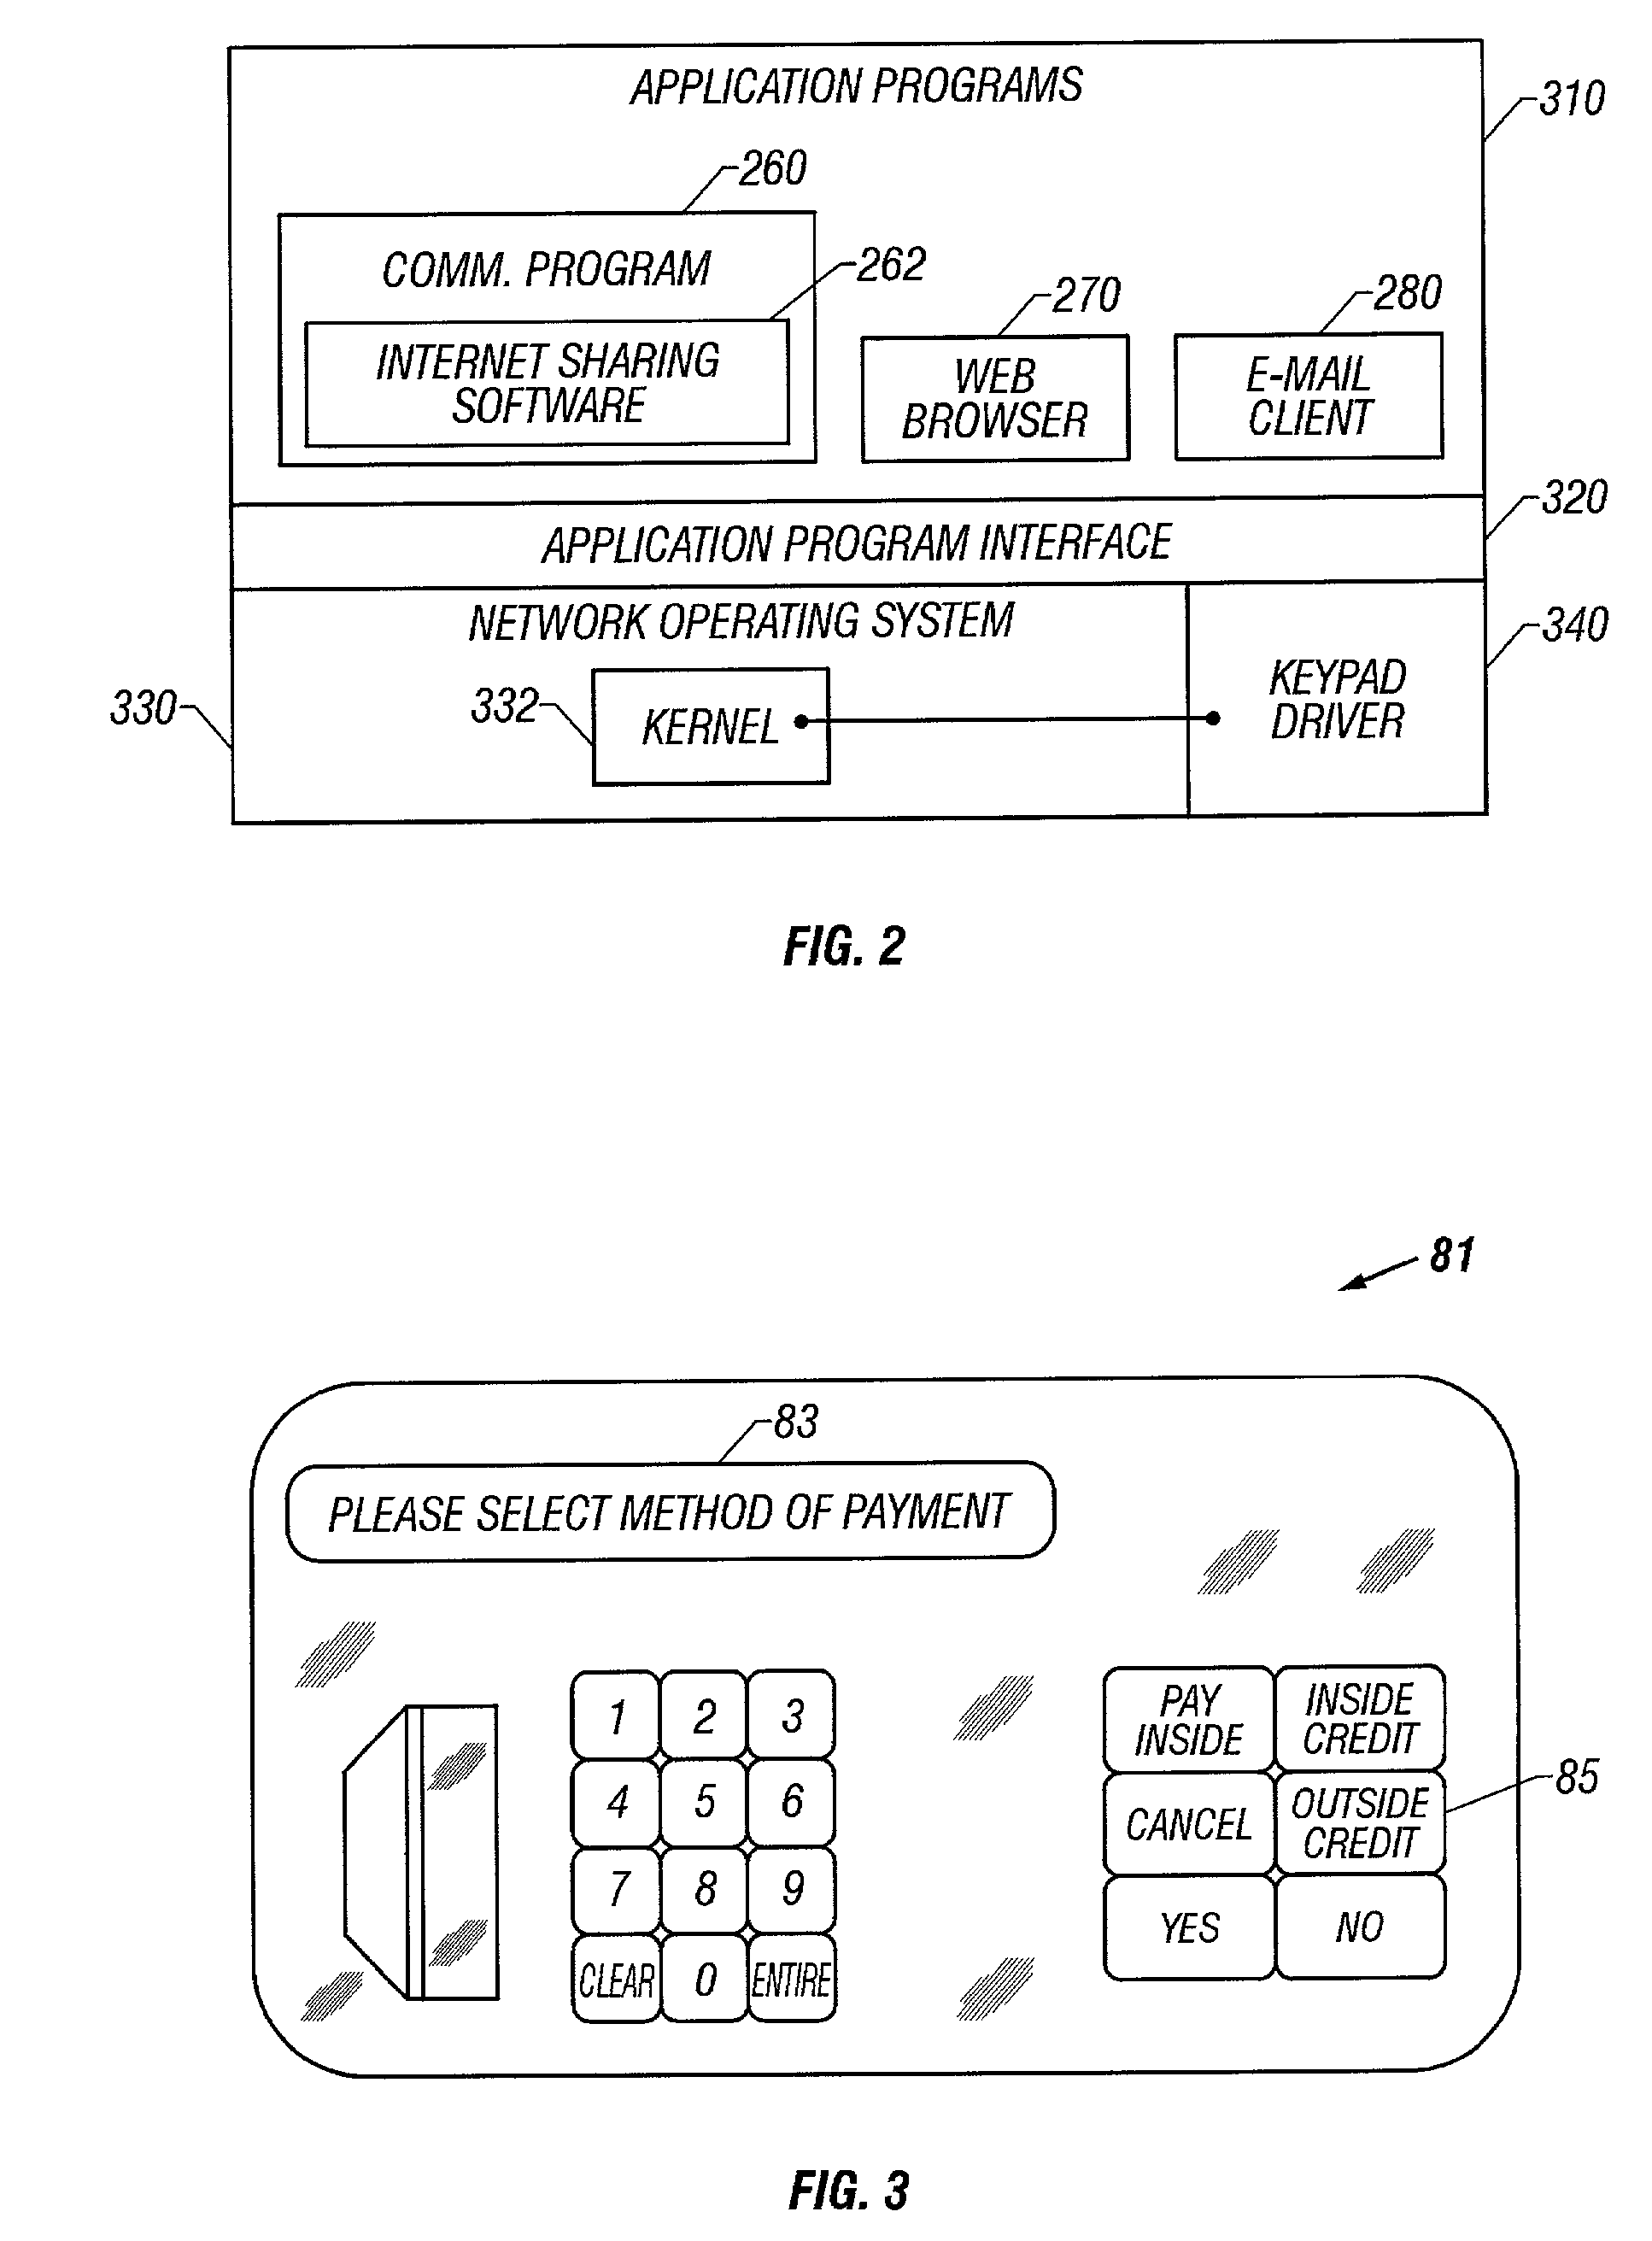 System and method for automatically adjusting merchandise pricing at a service-oriented interface terminal based upon the quantity of users present at the terminal